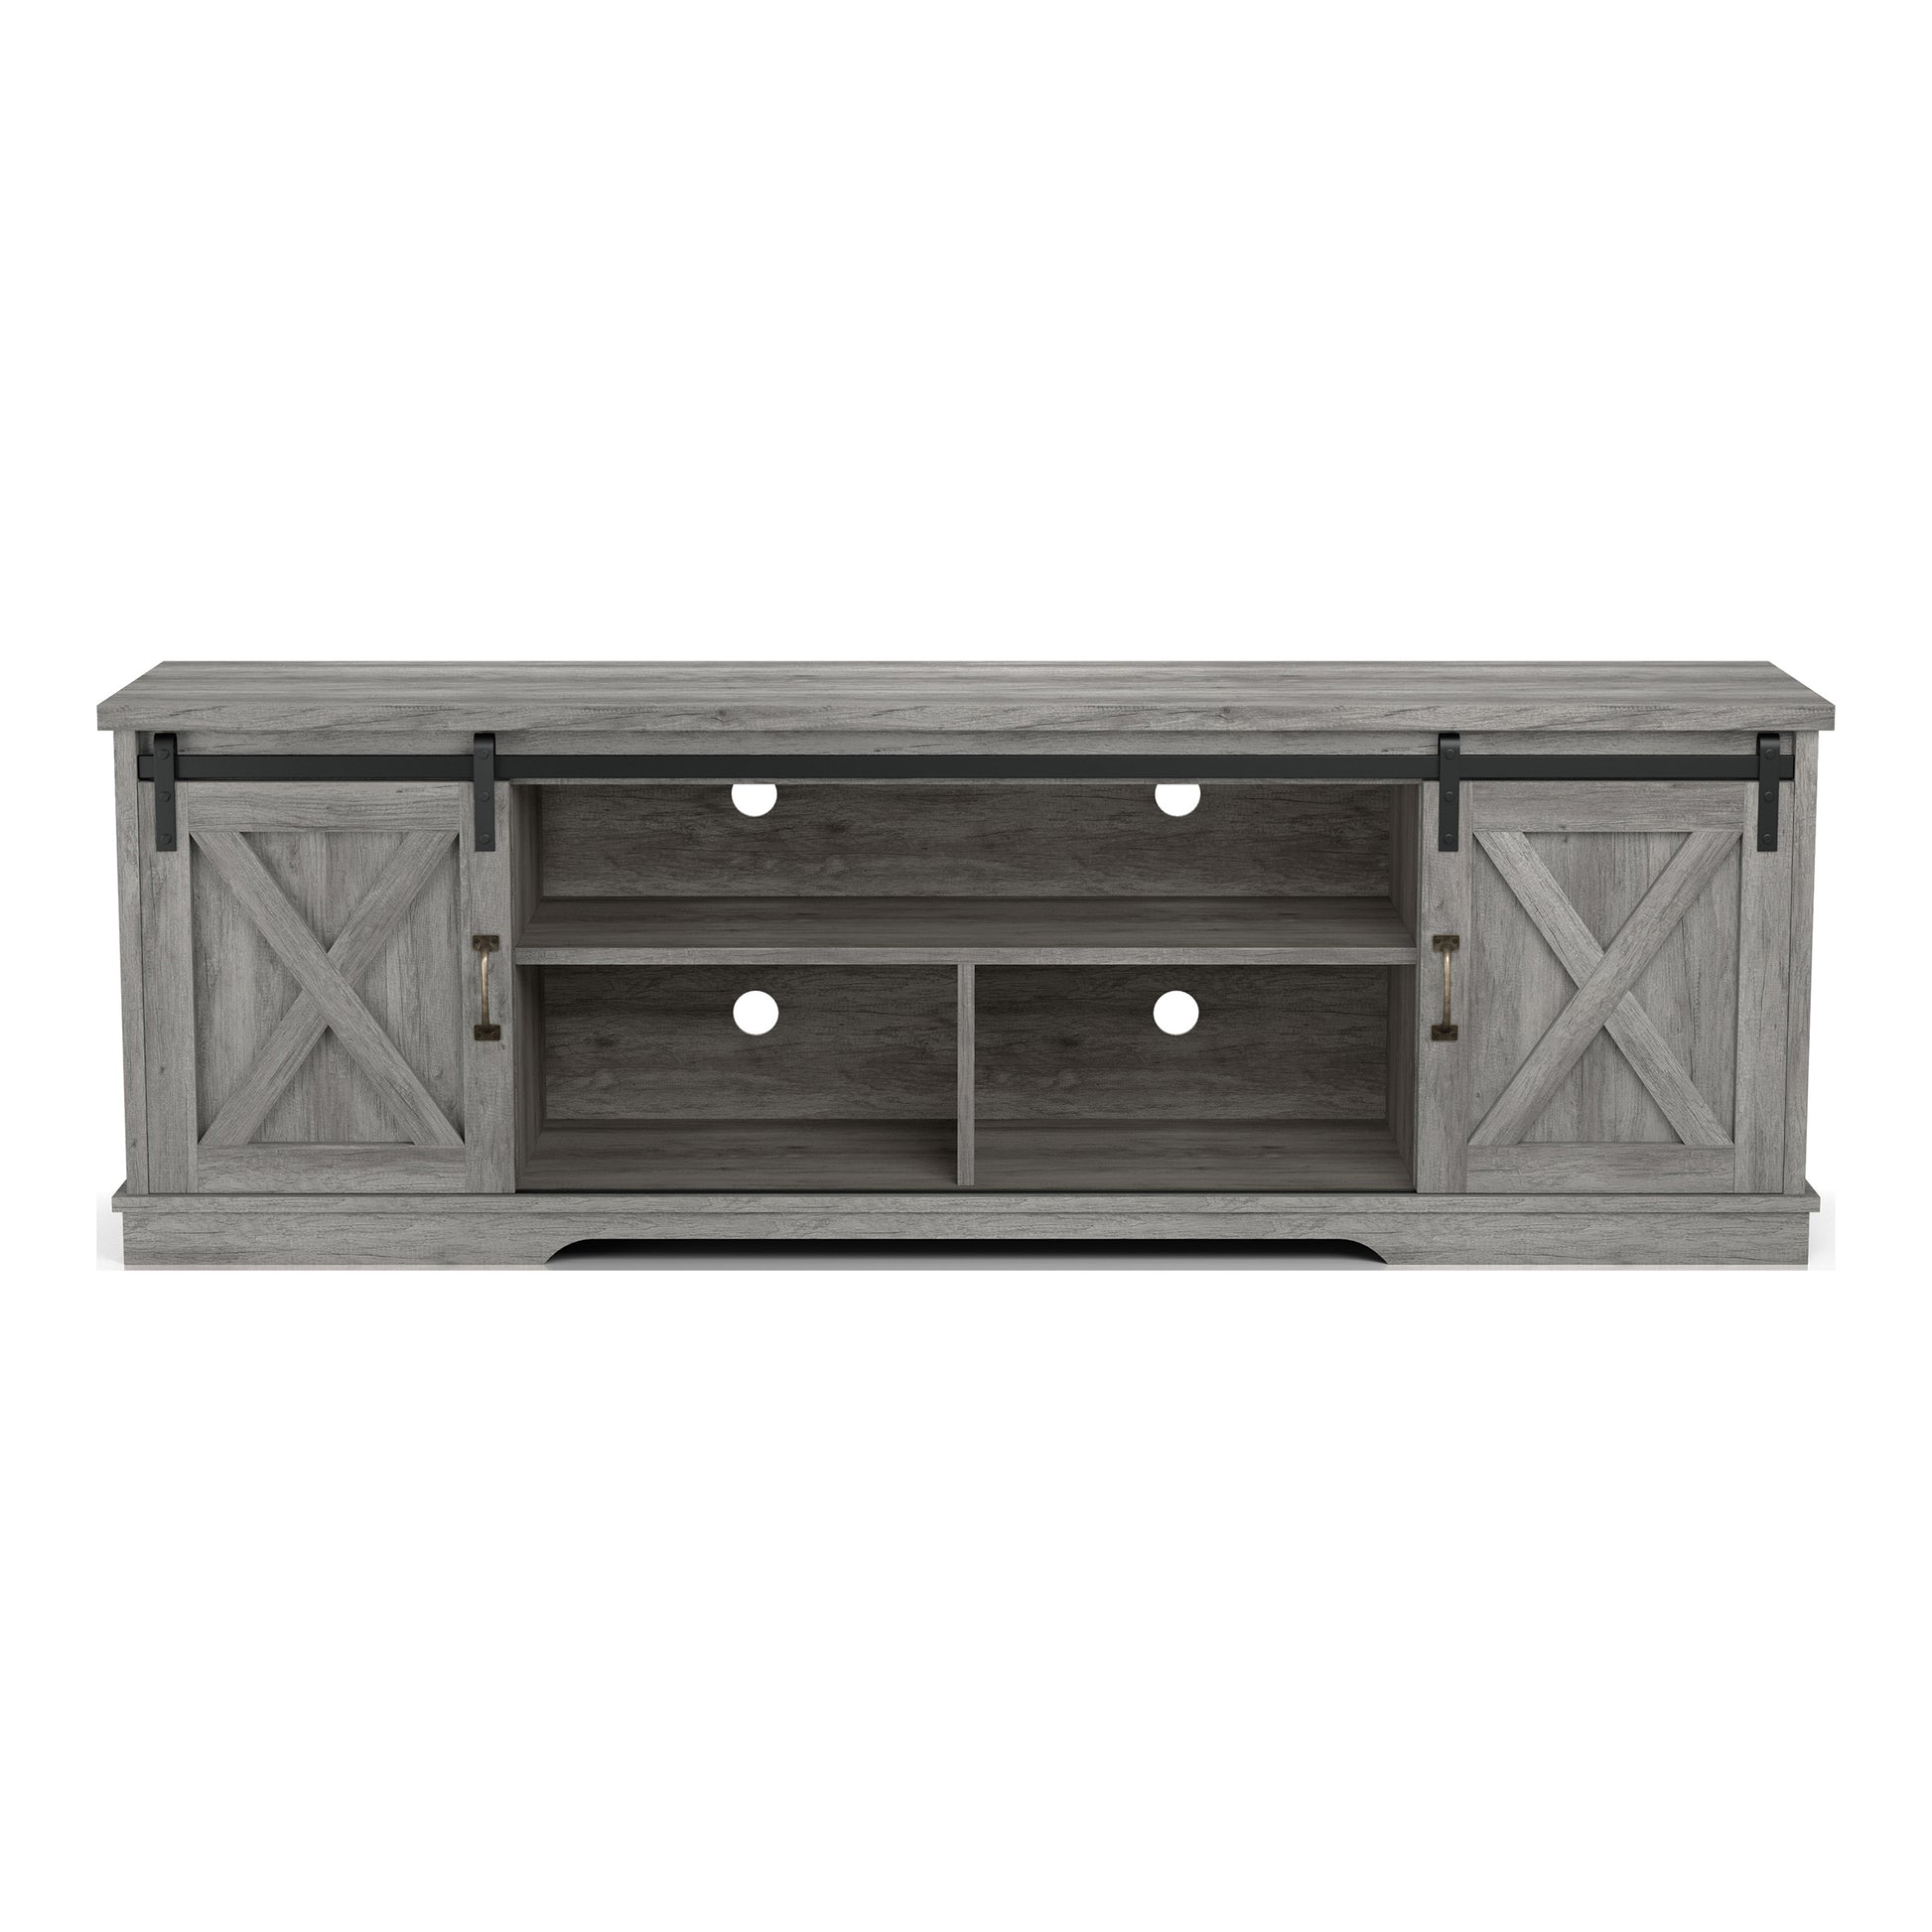 Front-facing stand only from a three-piece rustic vintage gray oak TV stand and pier entertainment set on a white background